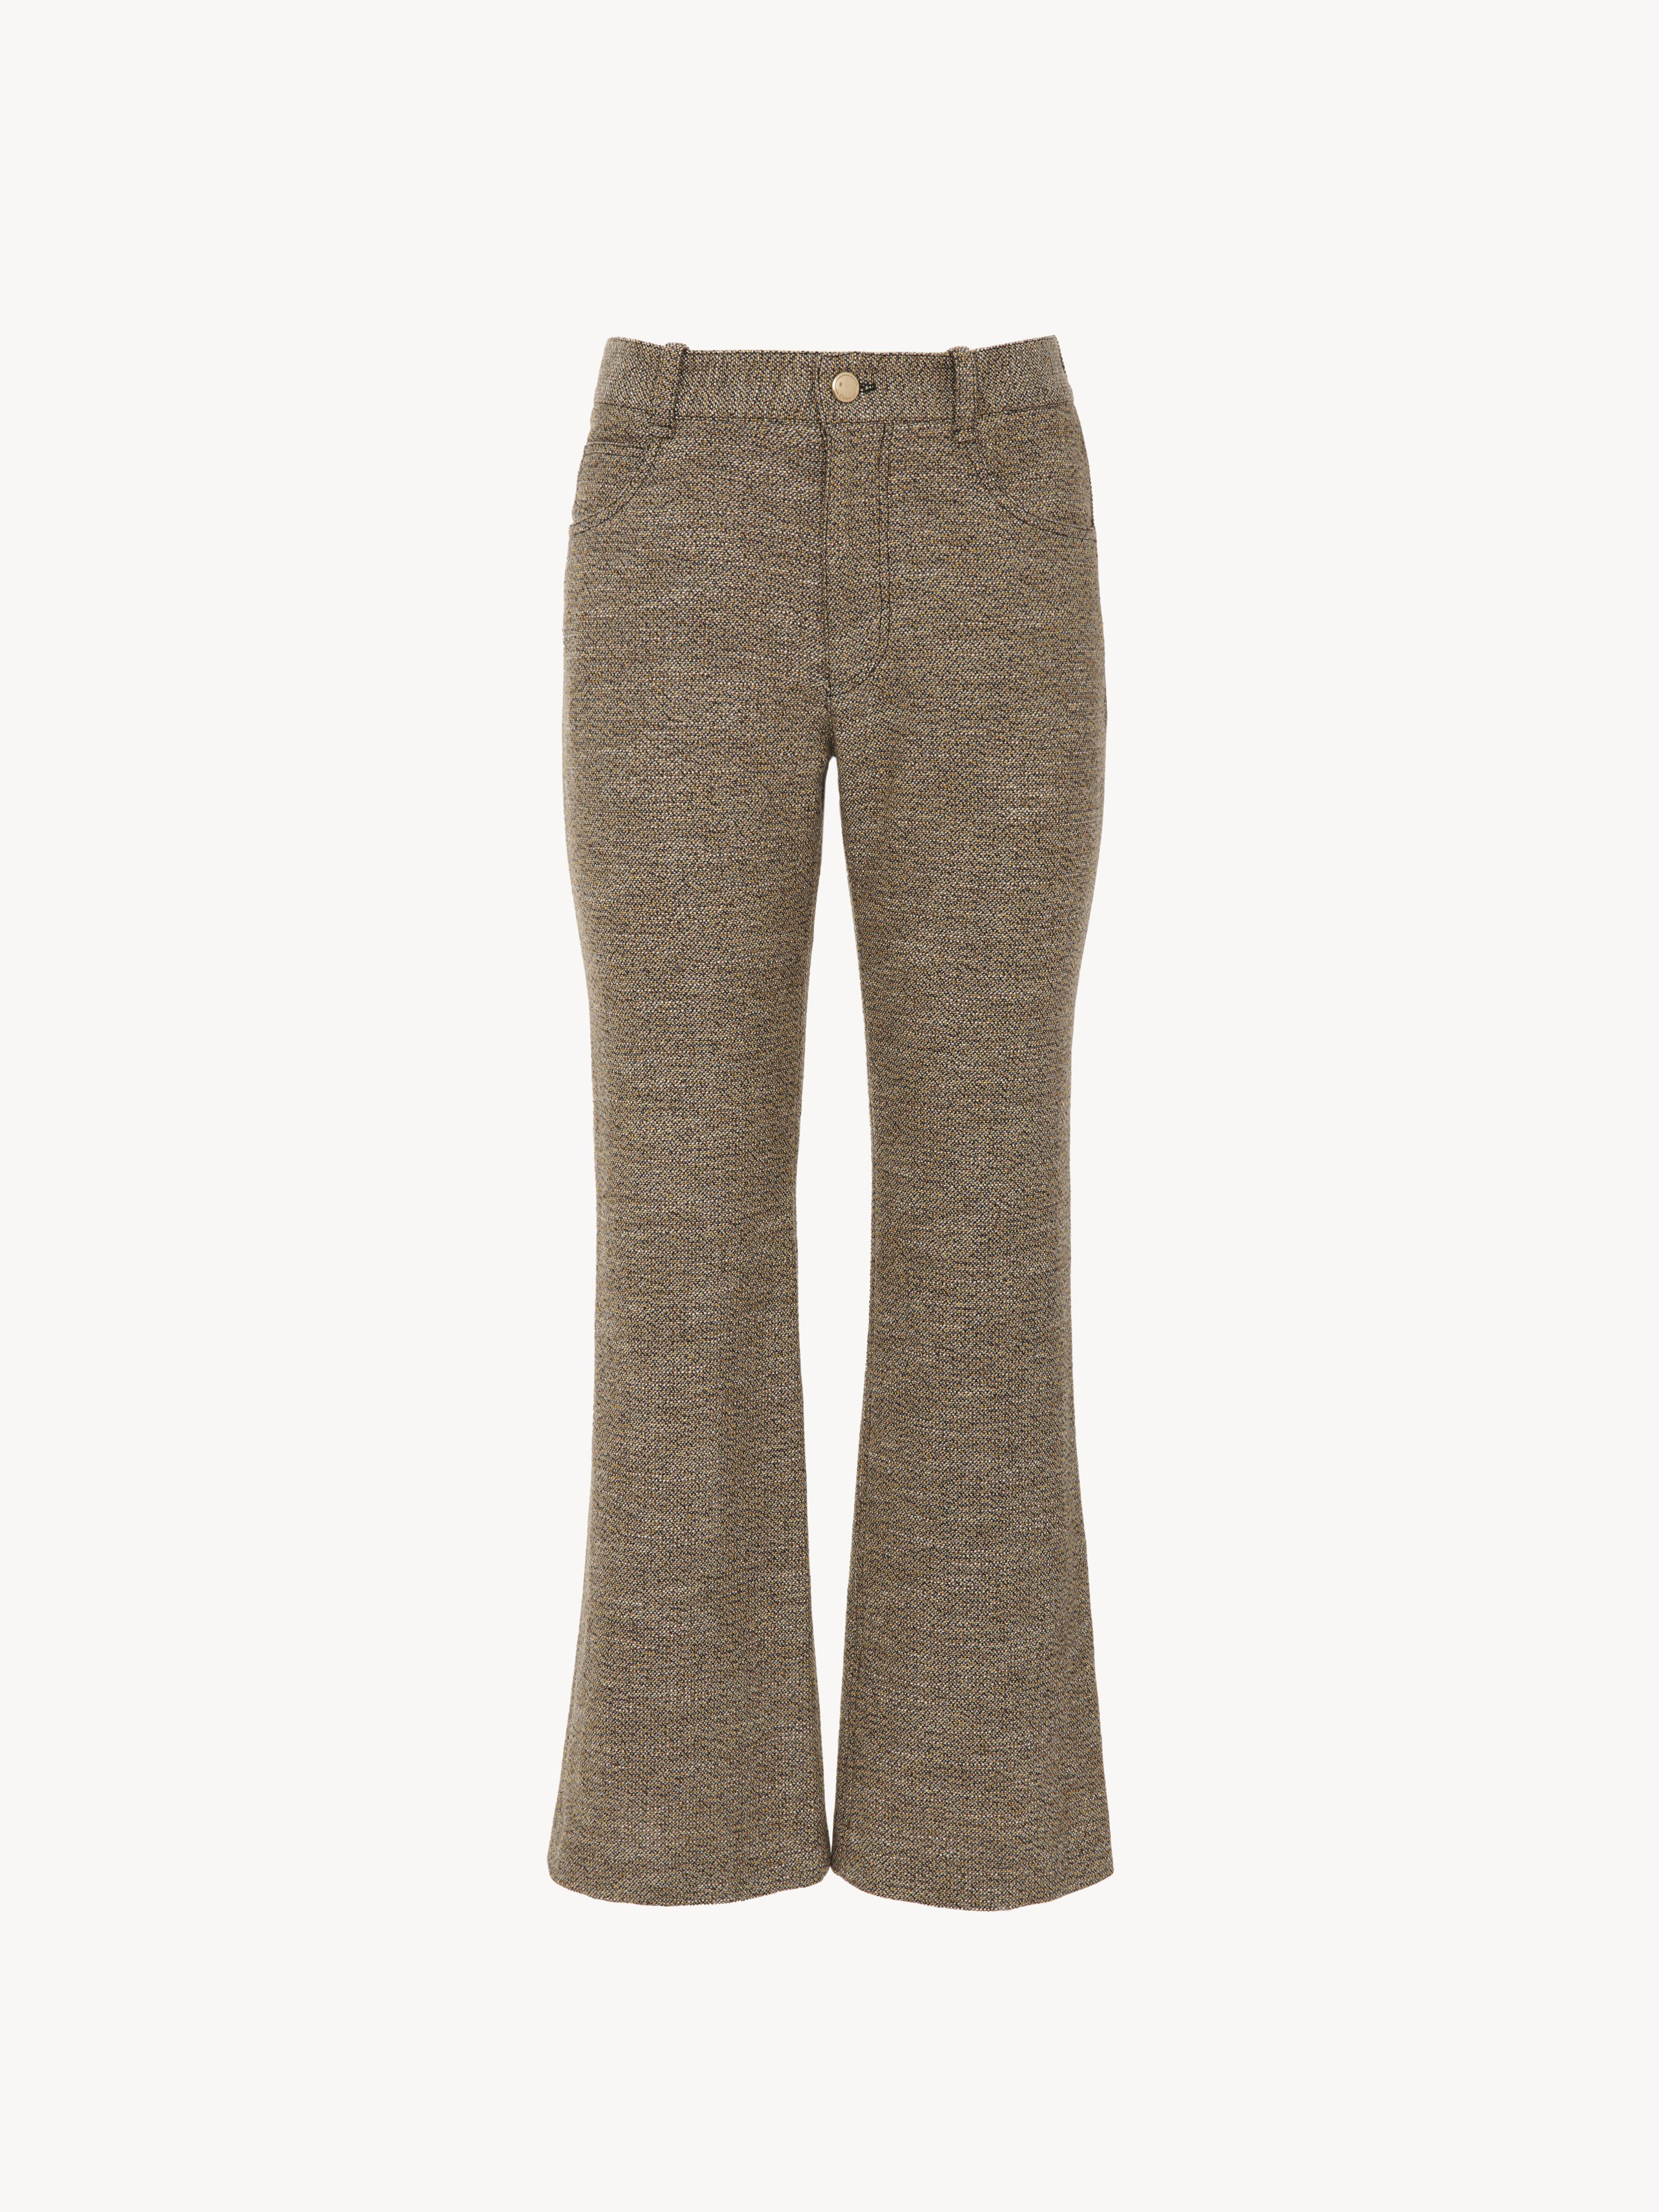 Chloé Cropped Bootcut Trousers With Marcie Signature Multicolor Size 6 100% Wool